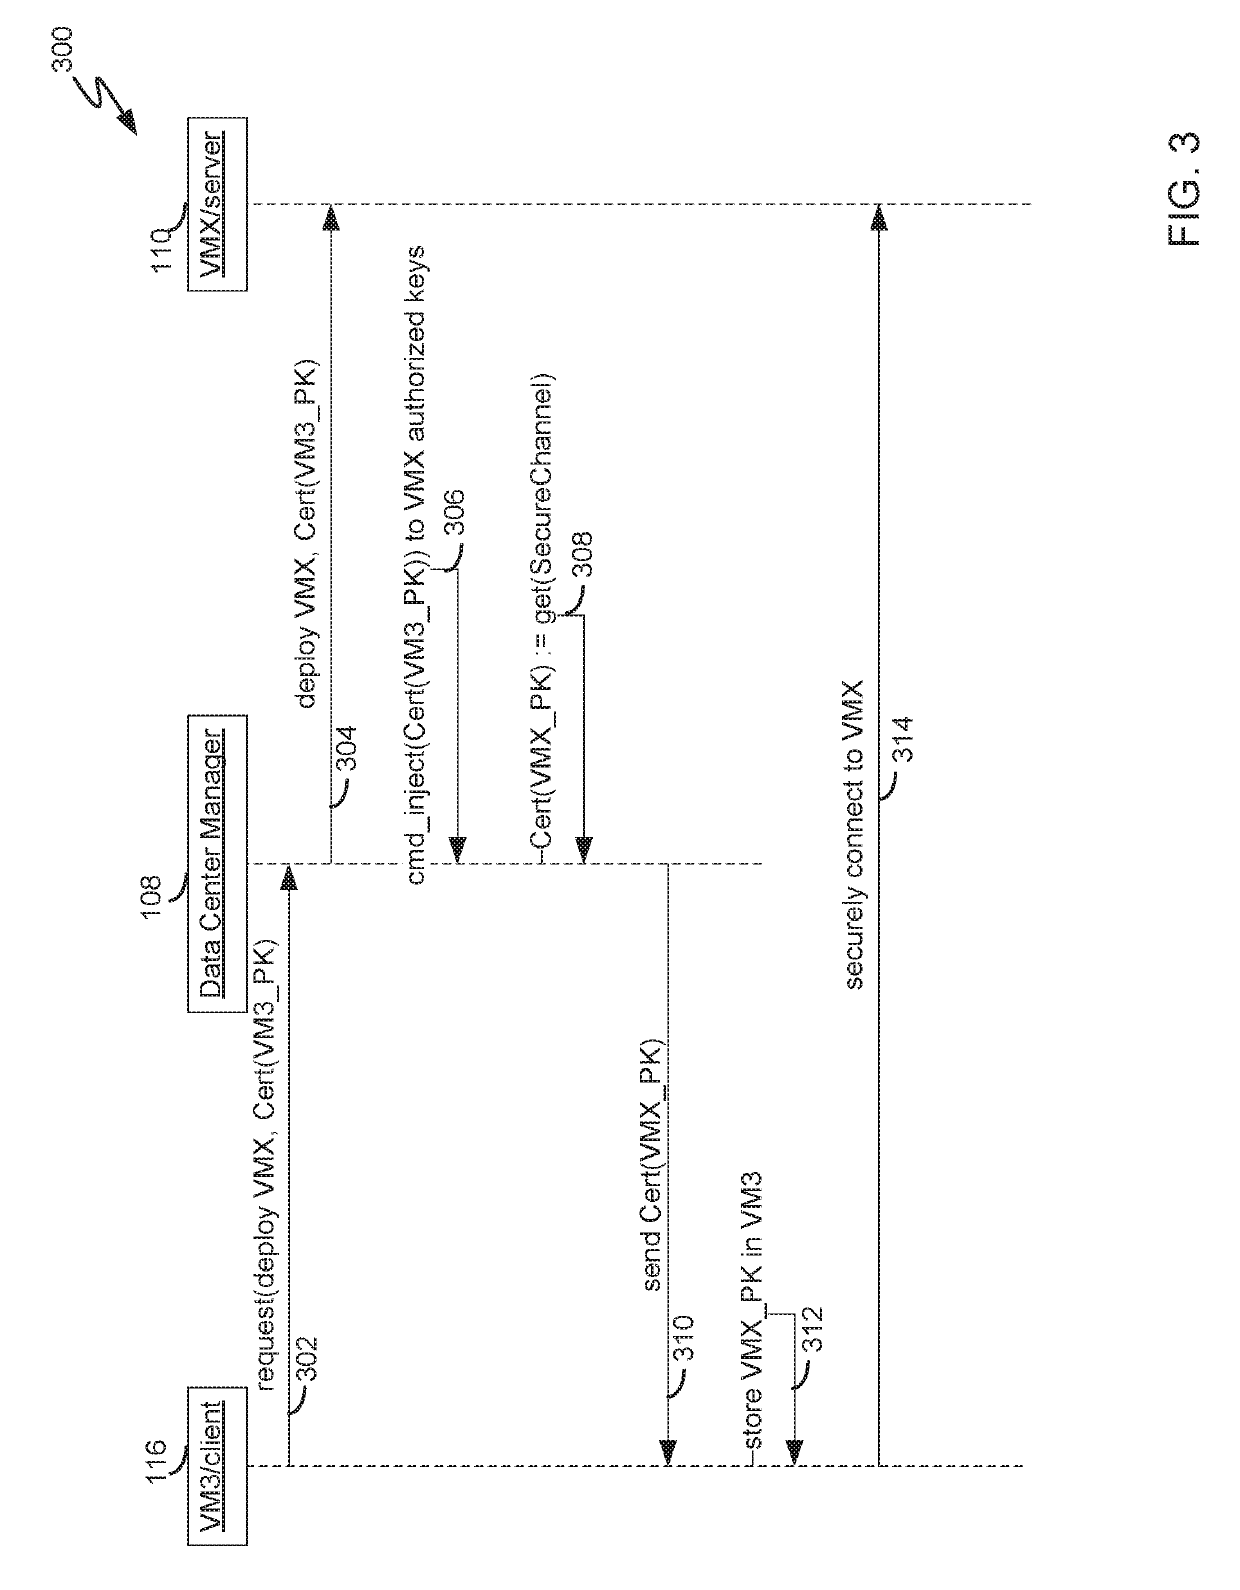 Automating establishment of initial mutual trust during deployment of a virtual appliance in a managed virtual data center environment